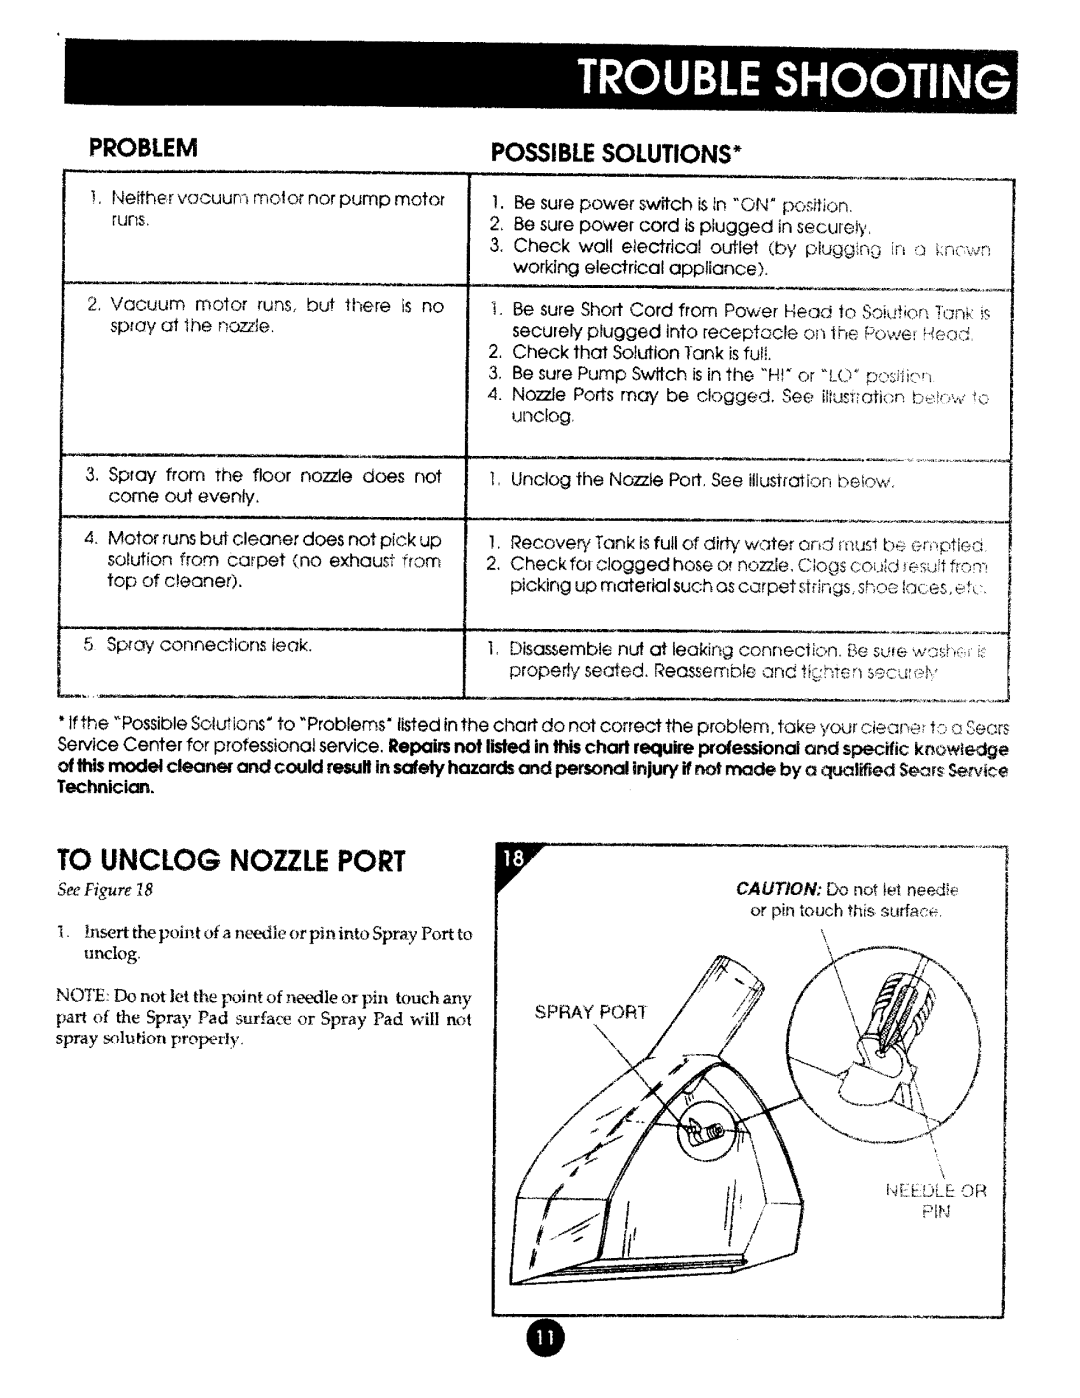 Kenmore 175.869039 manual To Unclog Nozzleport, Problem, Possible Solutions, Technician 